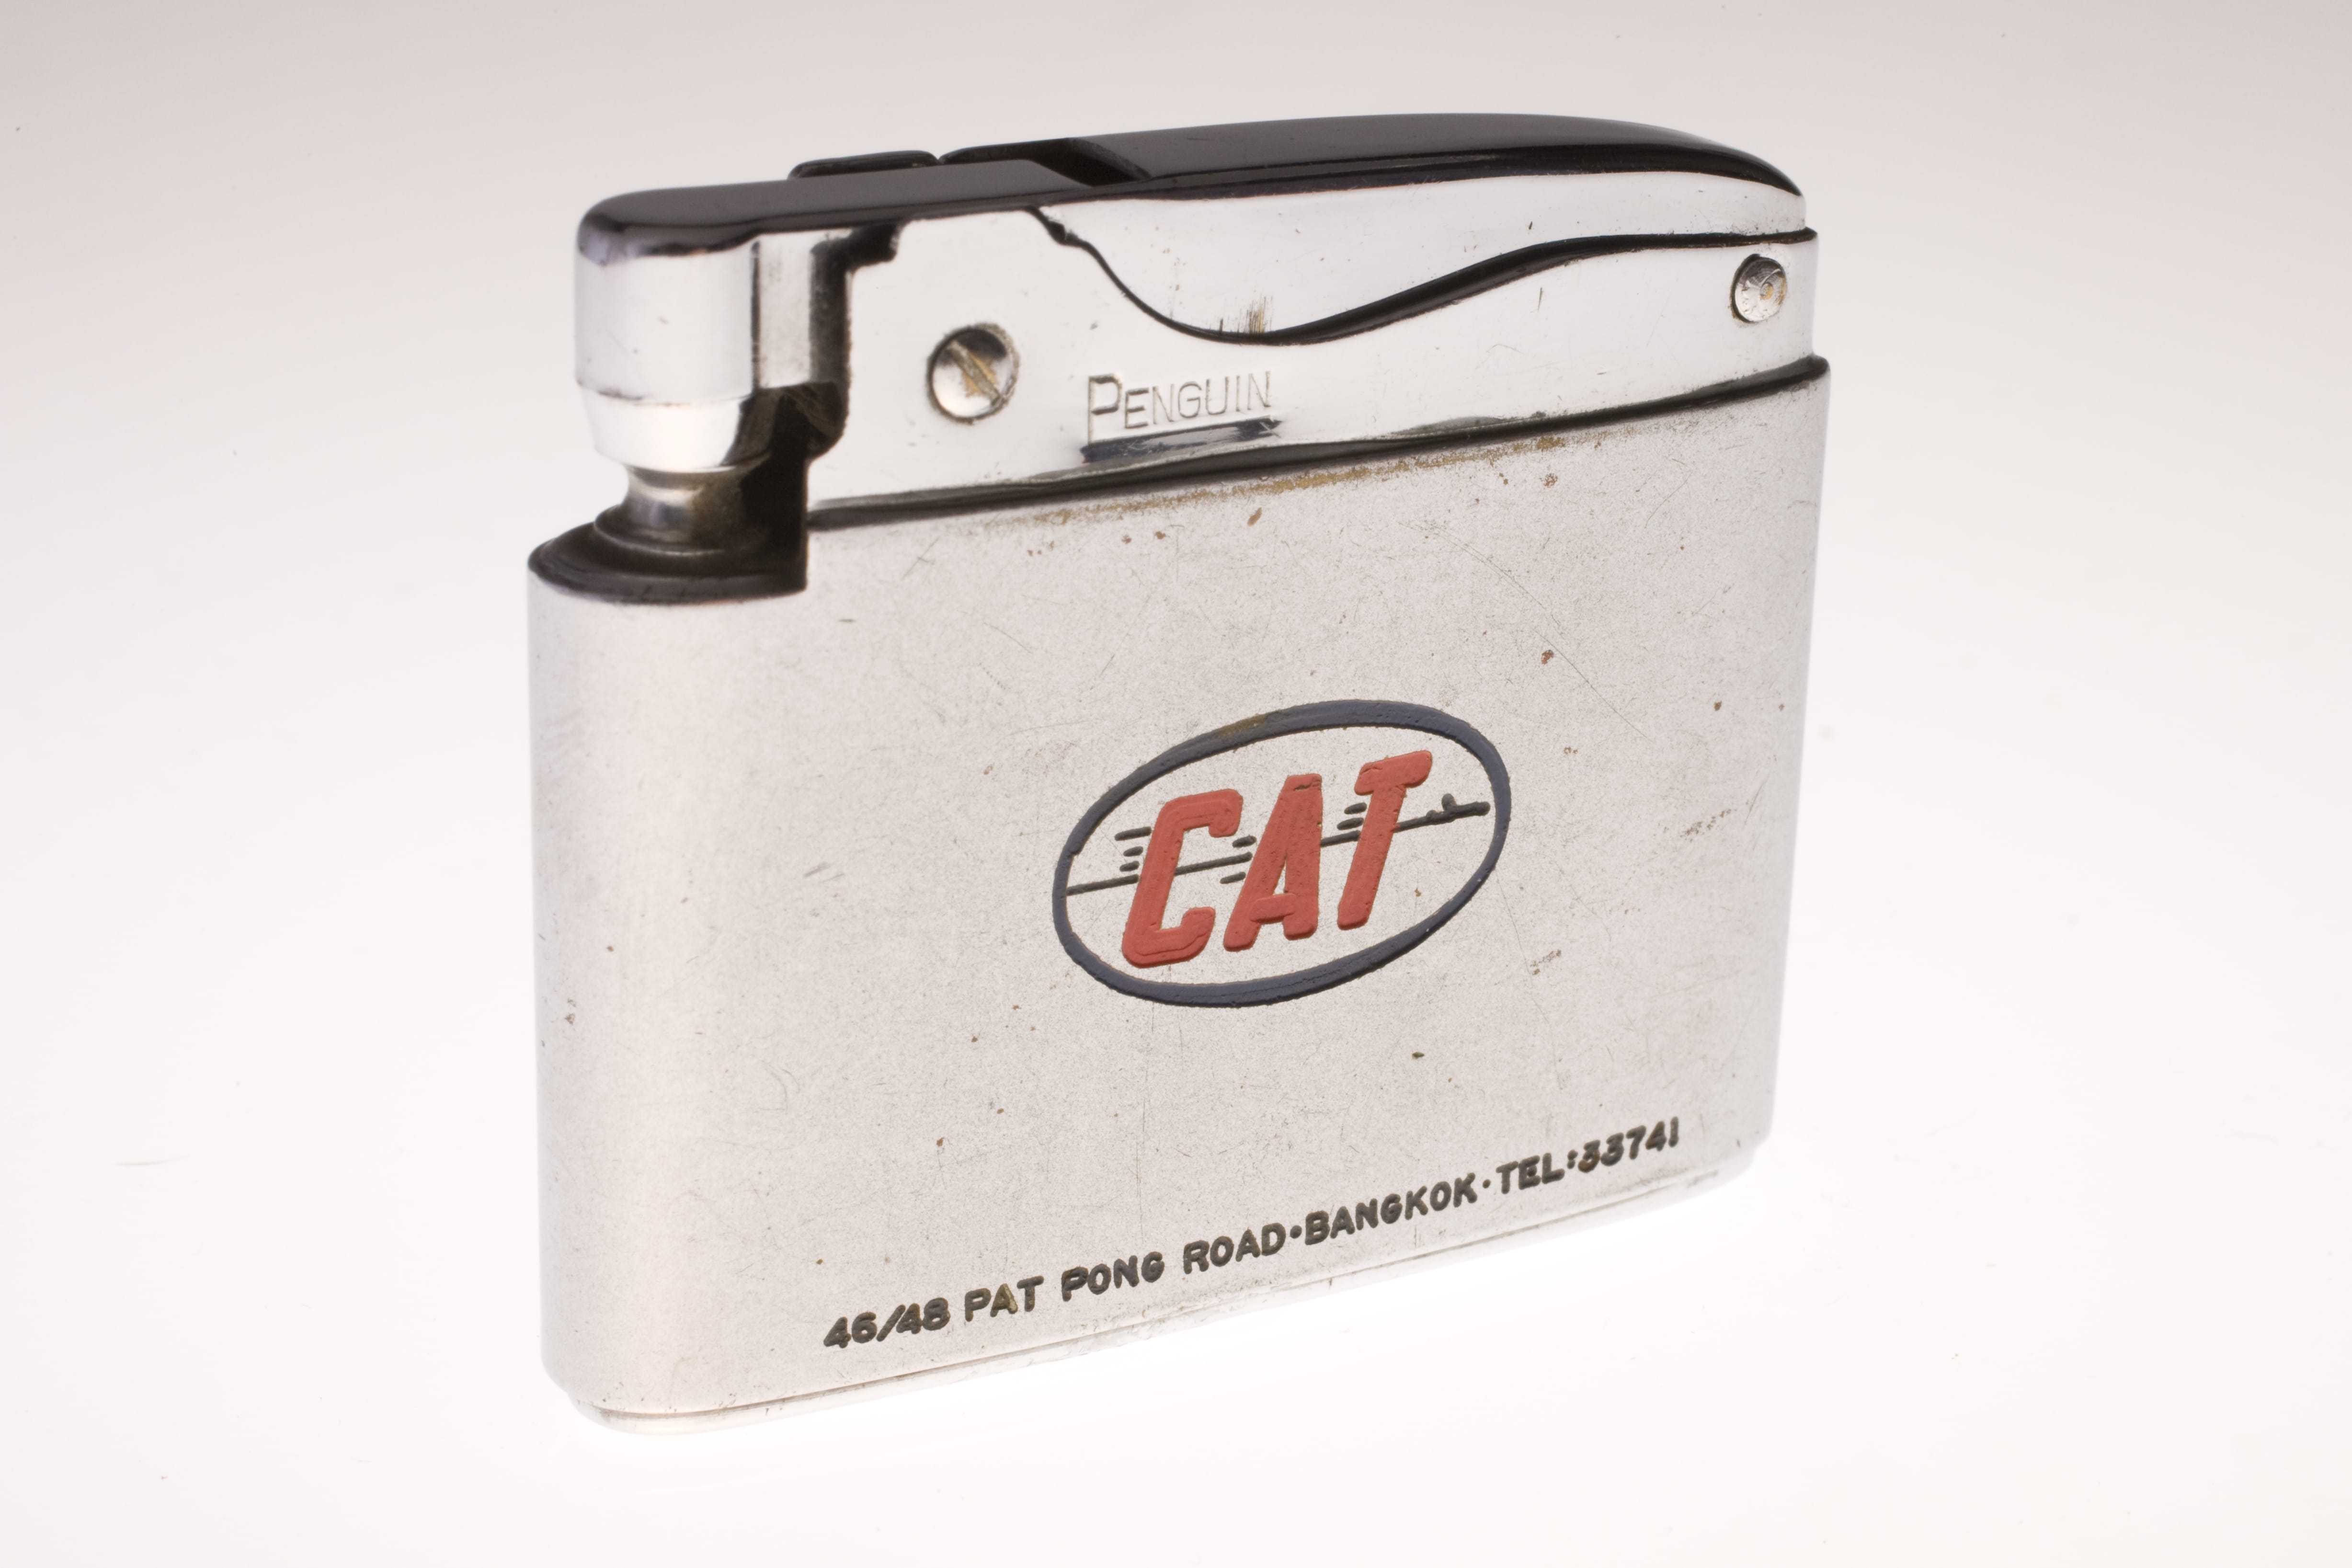 A white cigarette lighter with the Civil Air Transport logo engraved on the front